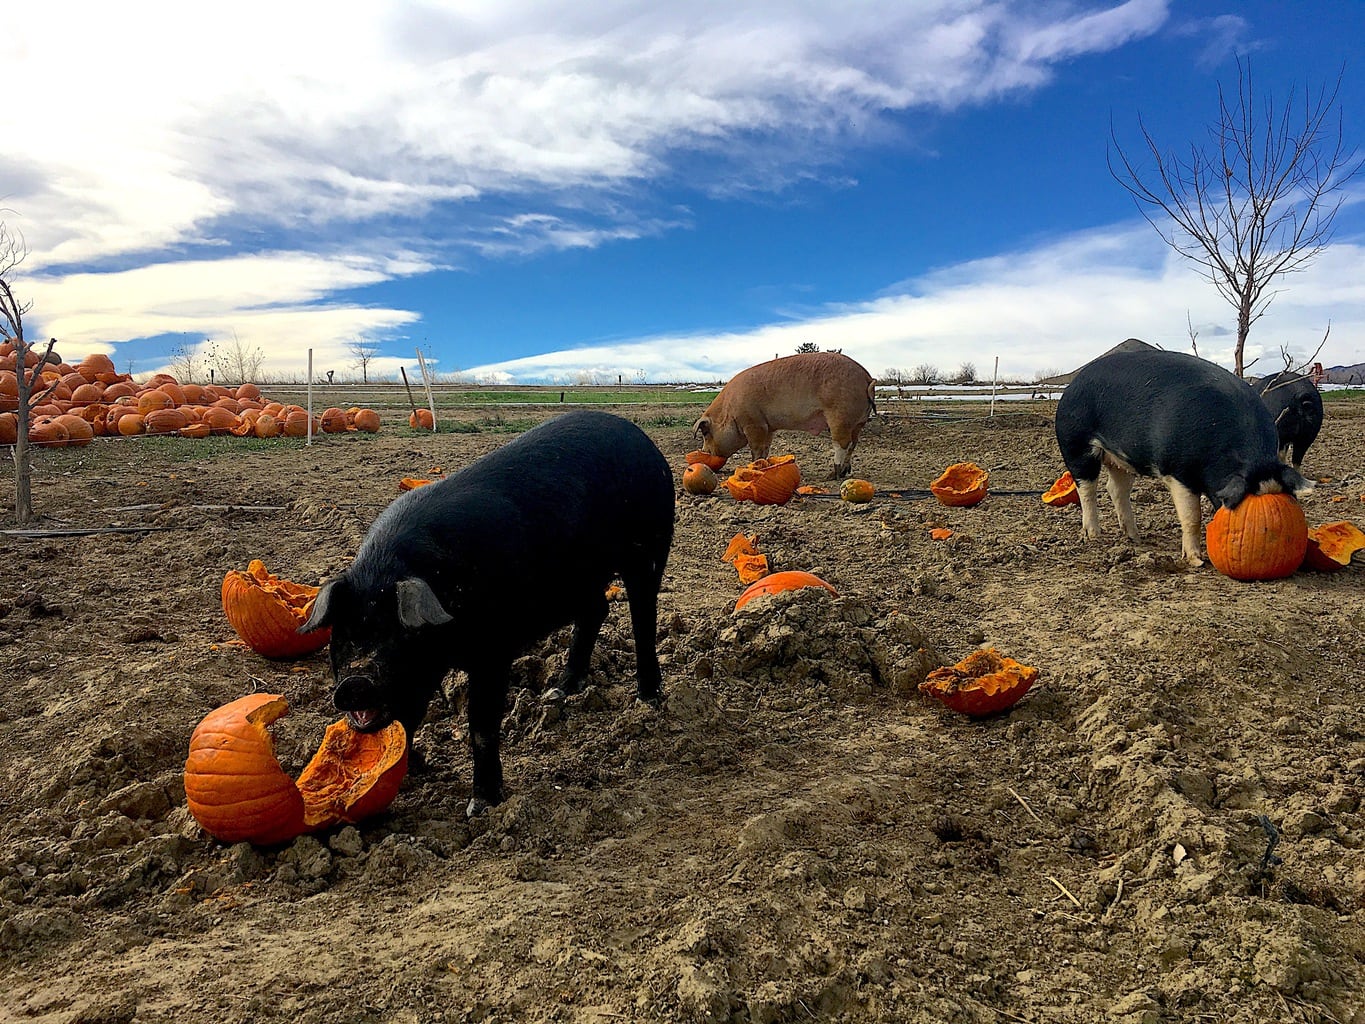 Pigs are central to the farm-to-table operation at Black Cat Farm.